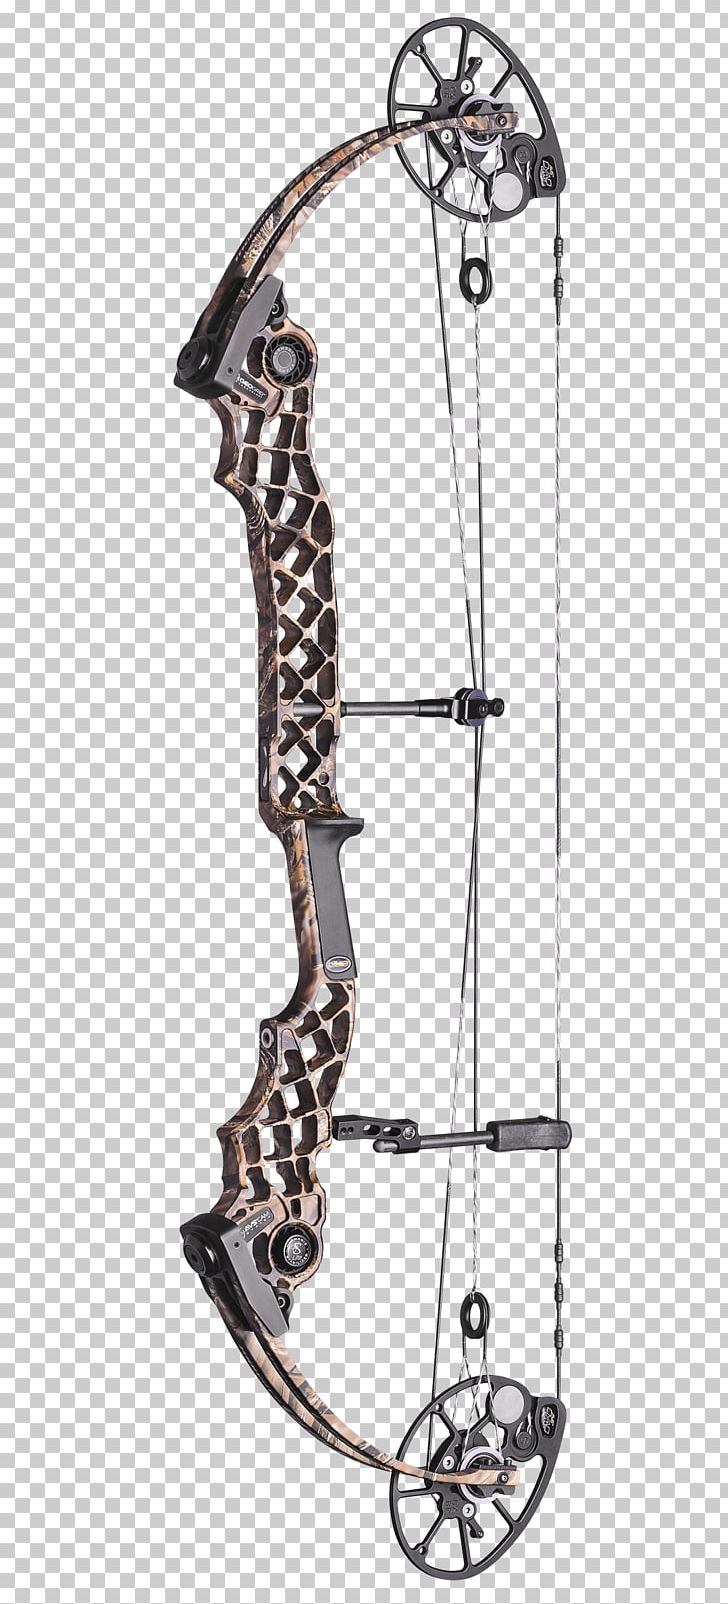 Bow And Arrow Compound Bows Archery Bowhunting Shooting Sport PNG, Clipart, Archery, Arrow, Bear Archery, Bow, Bow And Arrow Free PNG Download